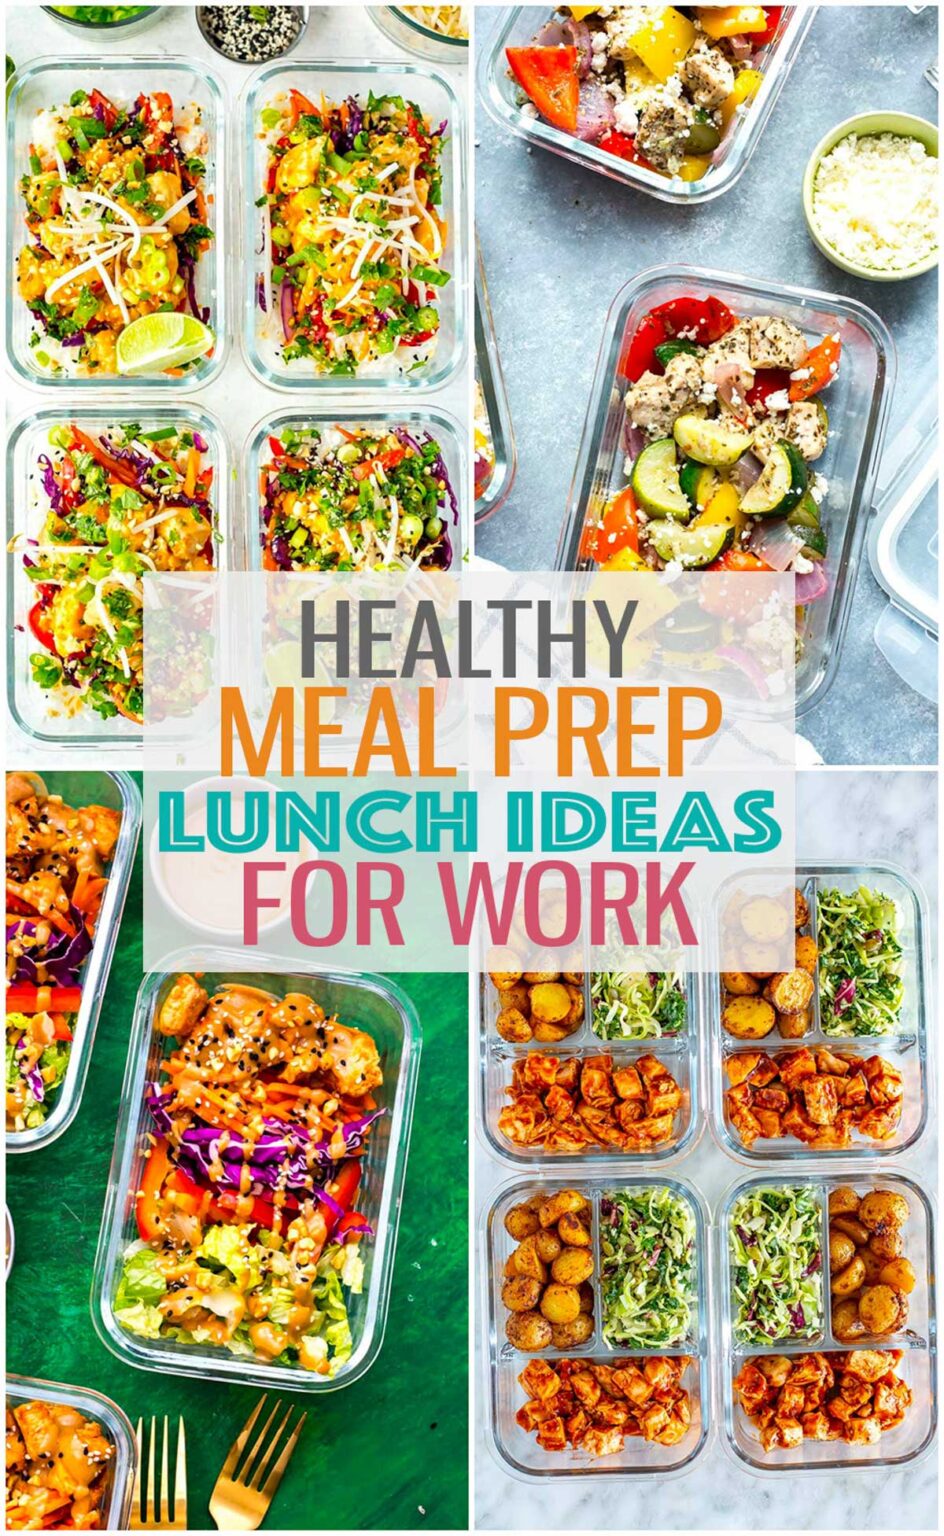 40+ Healthy Meal Prep Lunch Ideas for Work - The Girl on Bloor